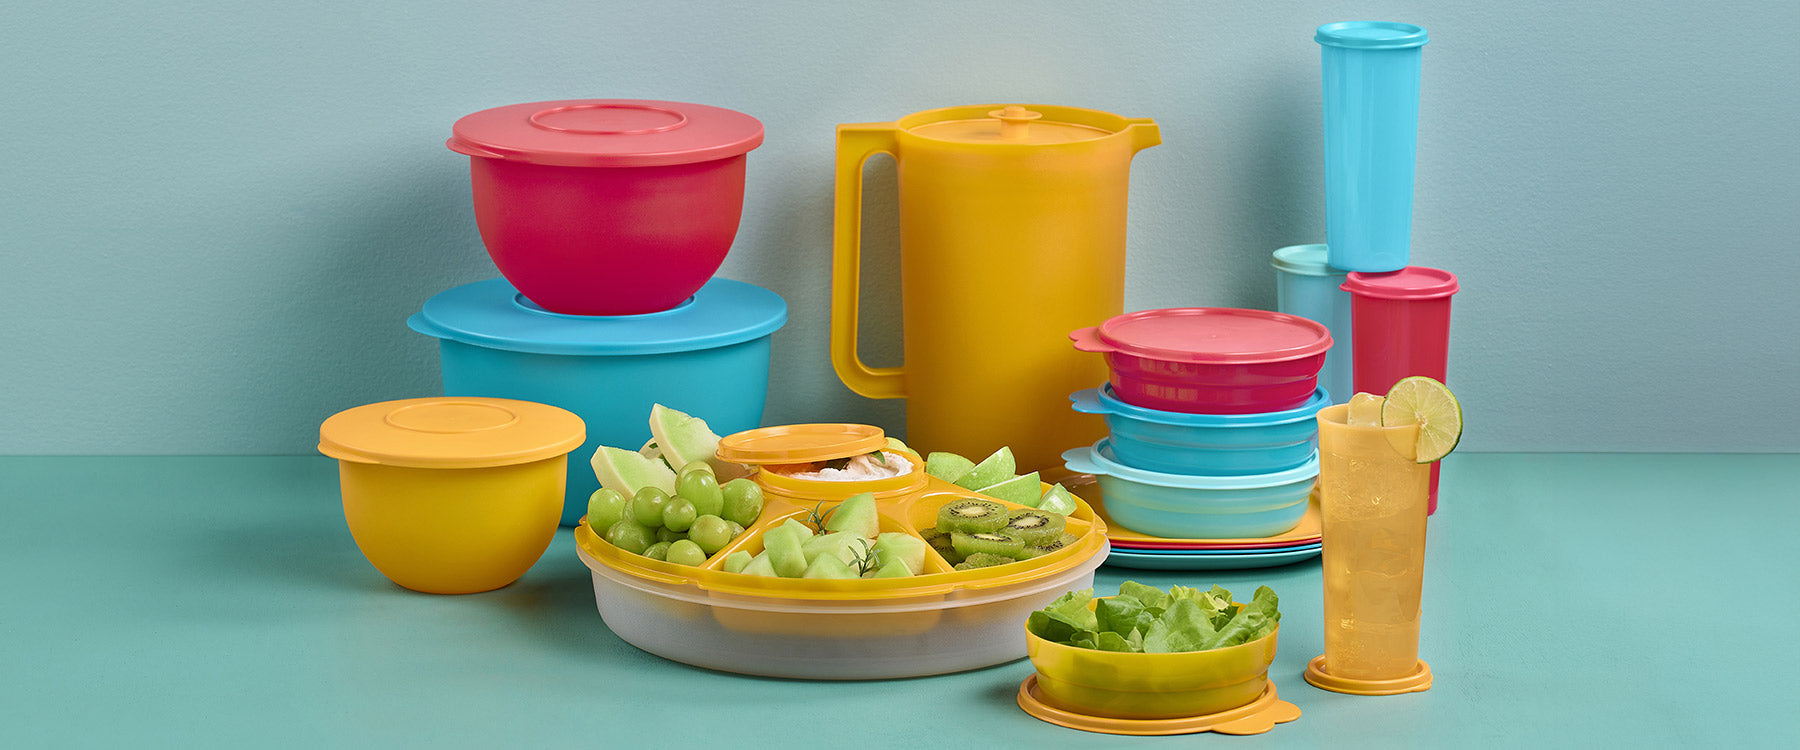 This New $10 Tupperware Bowl Will Keep your Food Fresher Than Ever